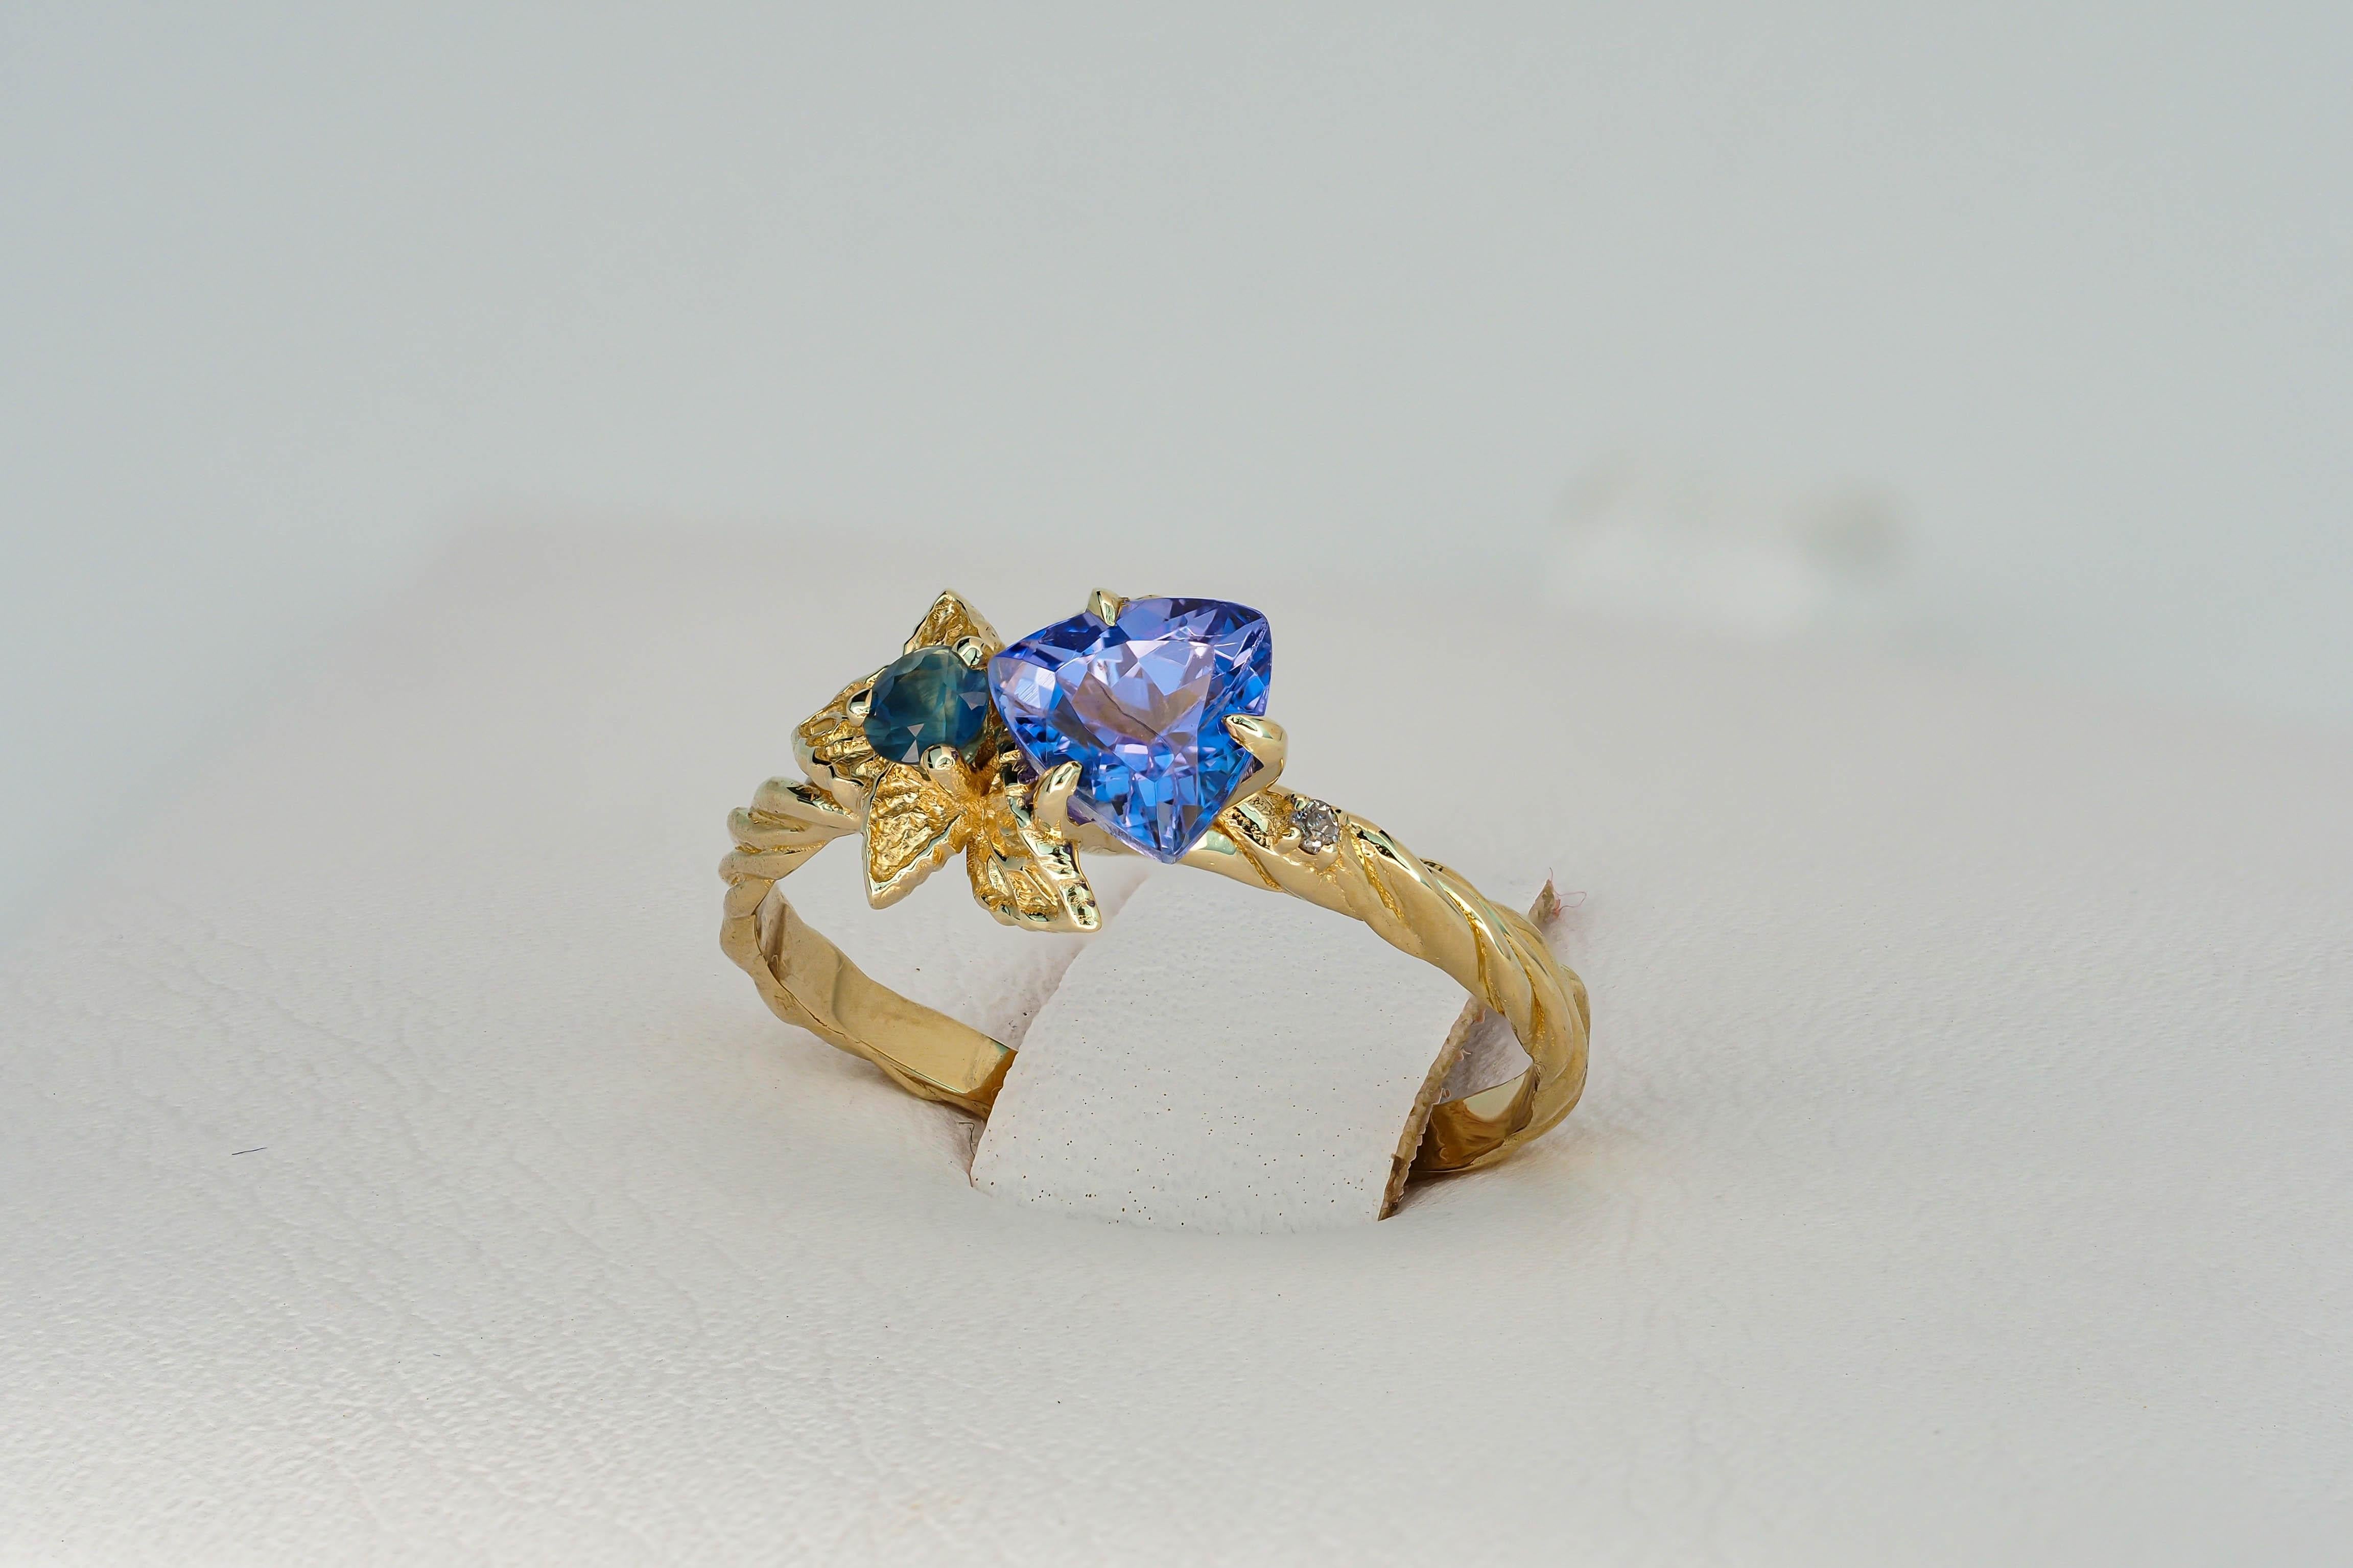 For Sale:  Tanzanite and diamonds 14k gold ring. Flower design ring with tanzanite. 7